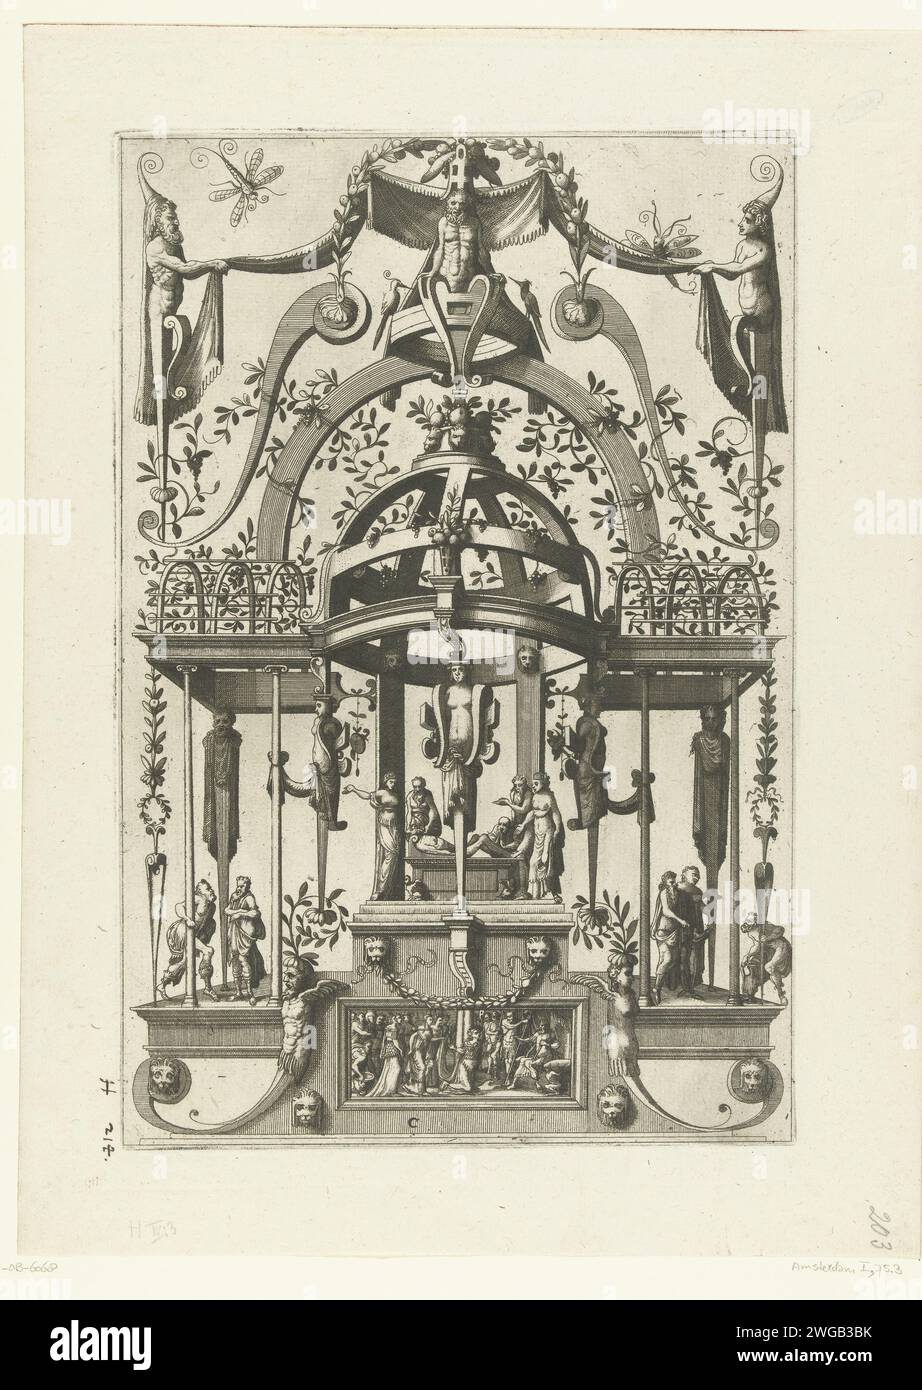 Panel with Grotesken and Latwerkpaviljoen, Johannes or Lucas van Doechum, After Cornelis Floris (II), 1556 print Under a dome of Latwerk, crowned by a Herme, a scene is set on a burial. To the right of the dome are people under a pergola. Leaf C from series of 12 magazines, numbered A-m with flat decorations of grotesken with rolling work, saters, garlands, trophies, animals and fantasy scenes Netherlands (possibly) paper etching ornament  grotesque Stock Photo